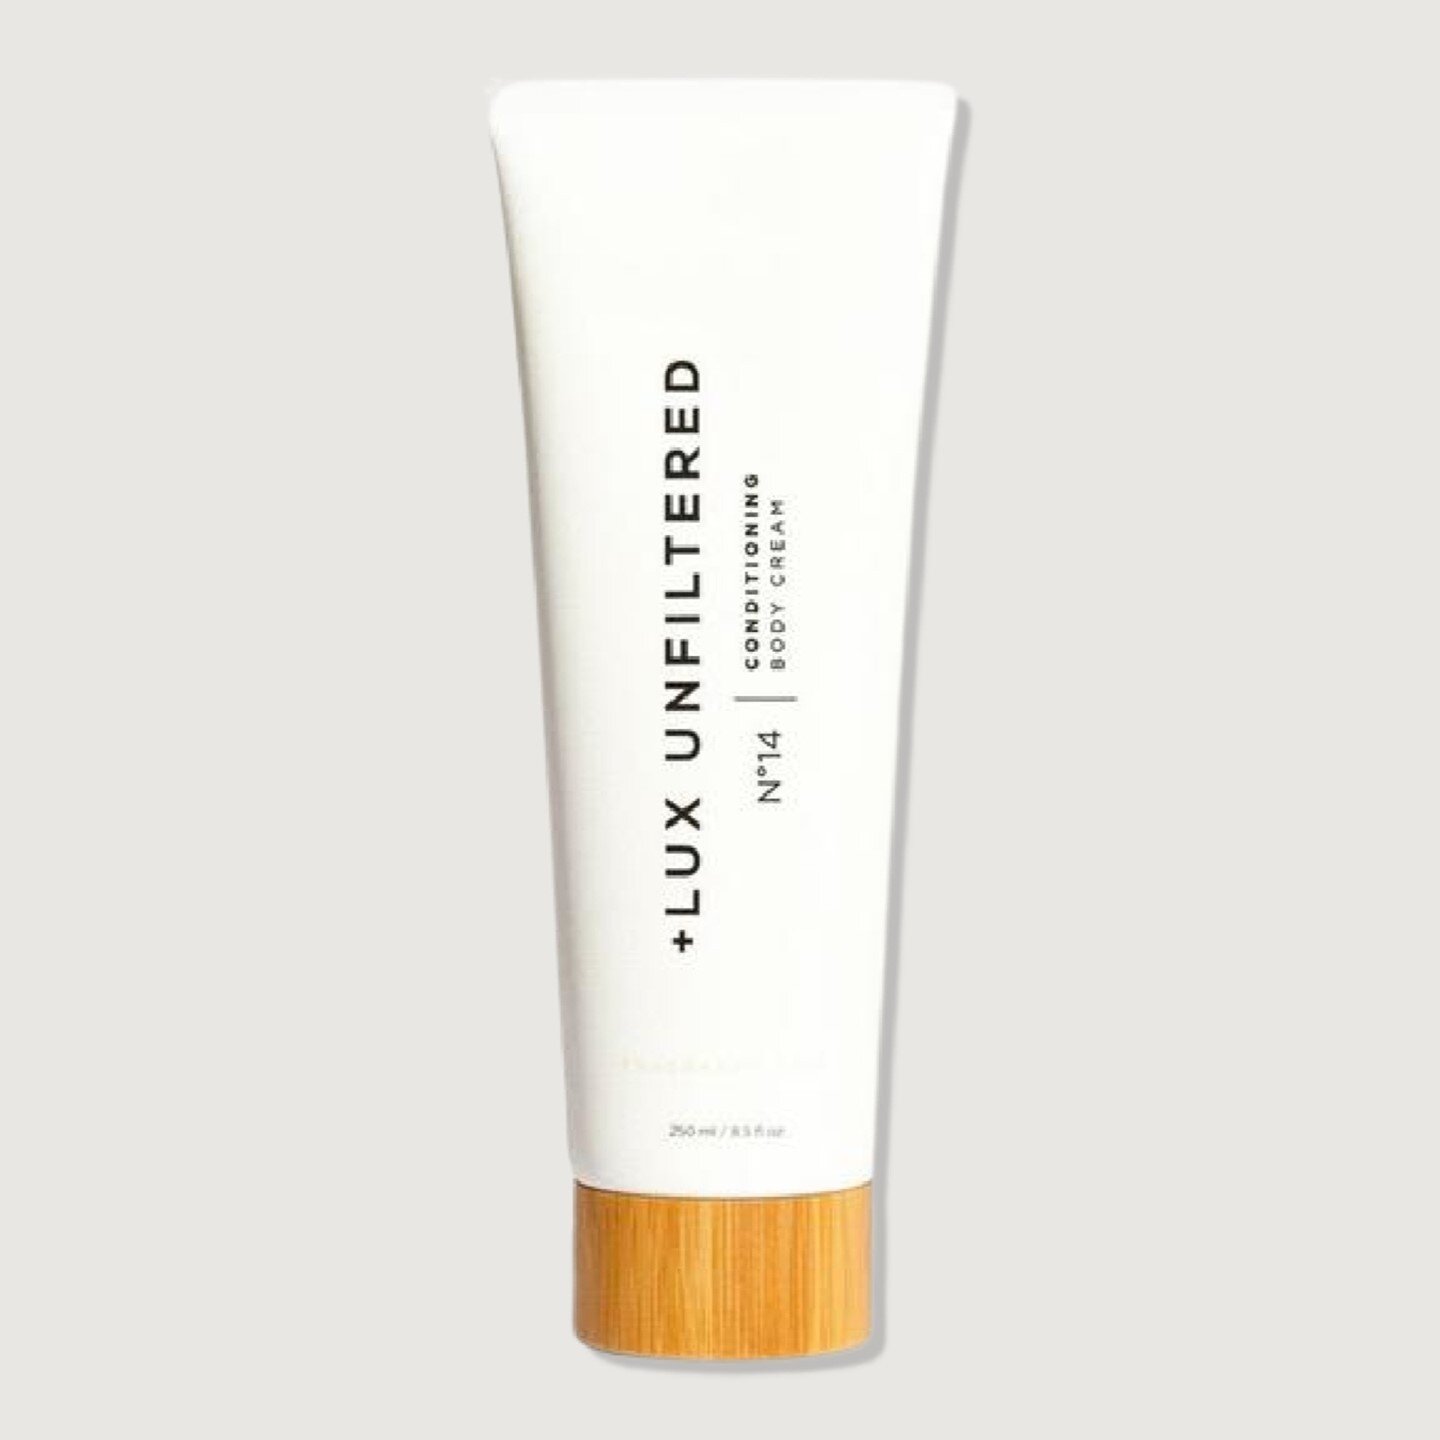 Another Lux Unfiltered product I love: the N&deg;14 Conditioning Body Cream! It's the most luxurious body butter loaded with amazing ingredients like jojoba oil, squalene, shea butter, Vitamin C, &amp; hyaluronic acid. You can get it either fragrance